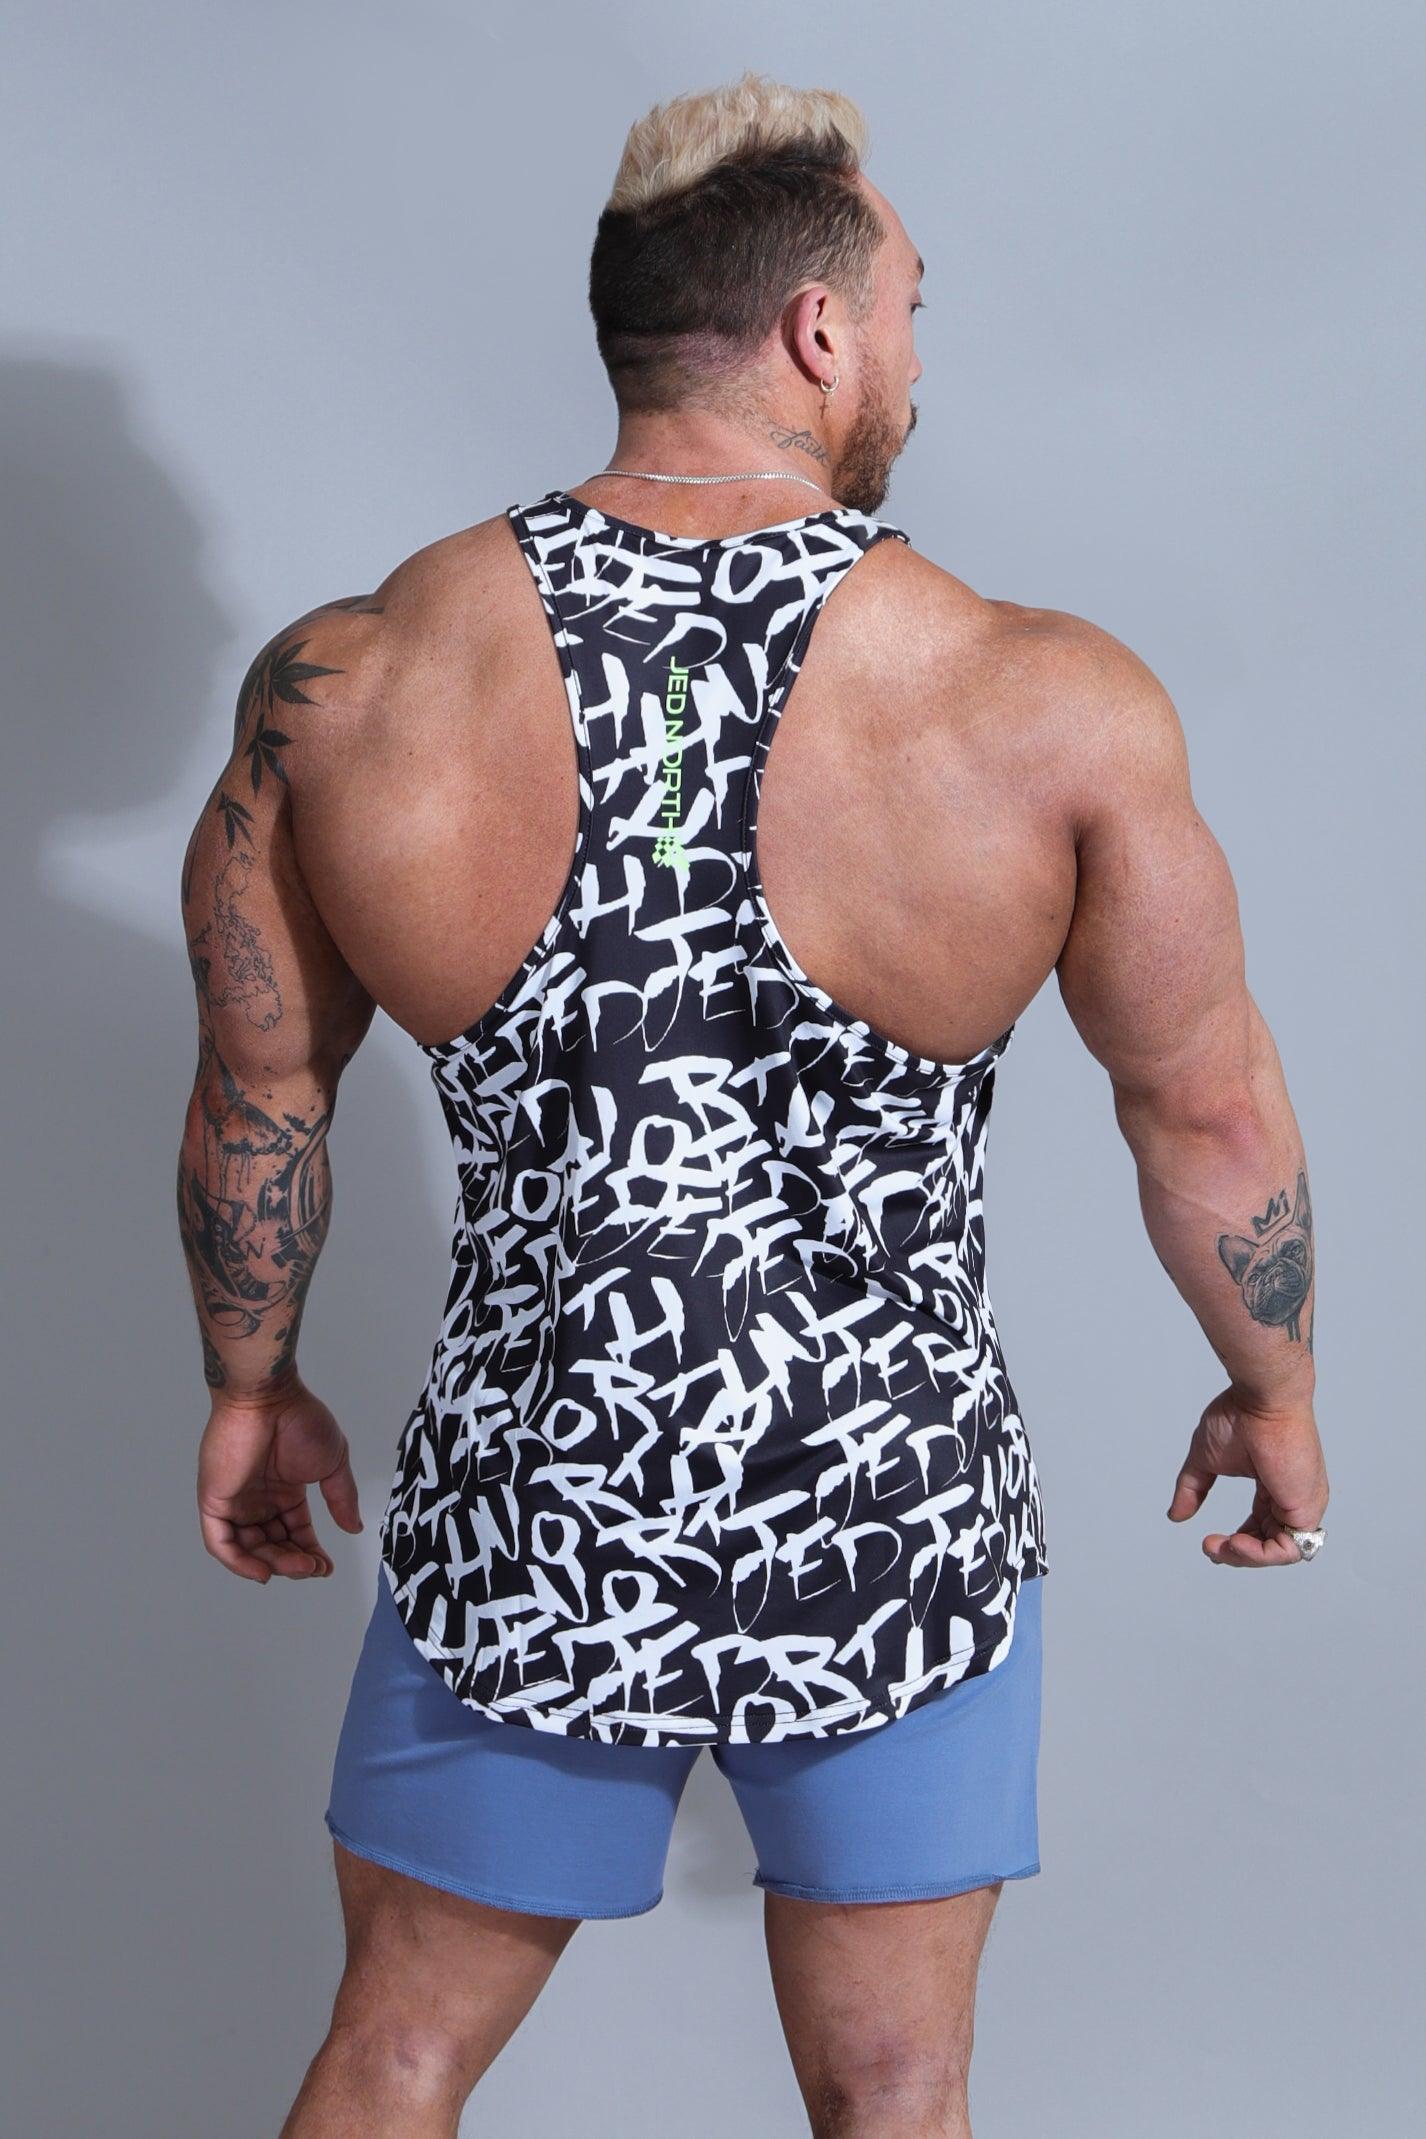 Graphic Muscle Stringer - Chaotic Black